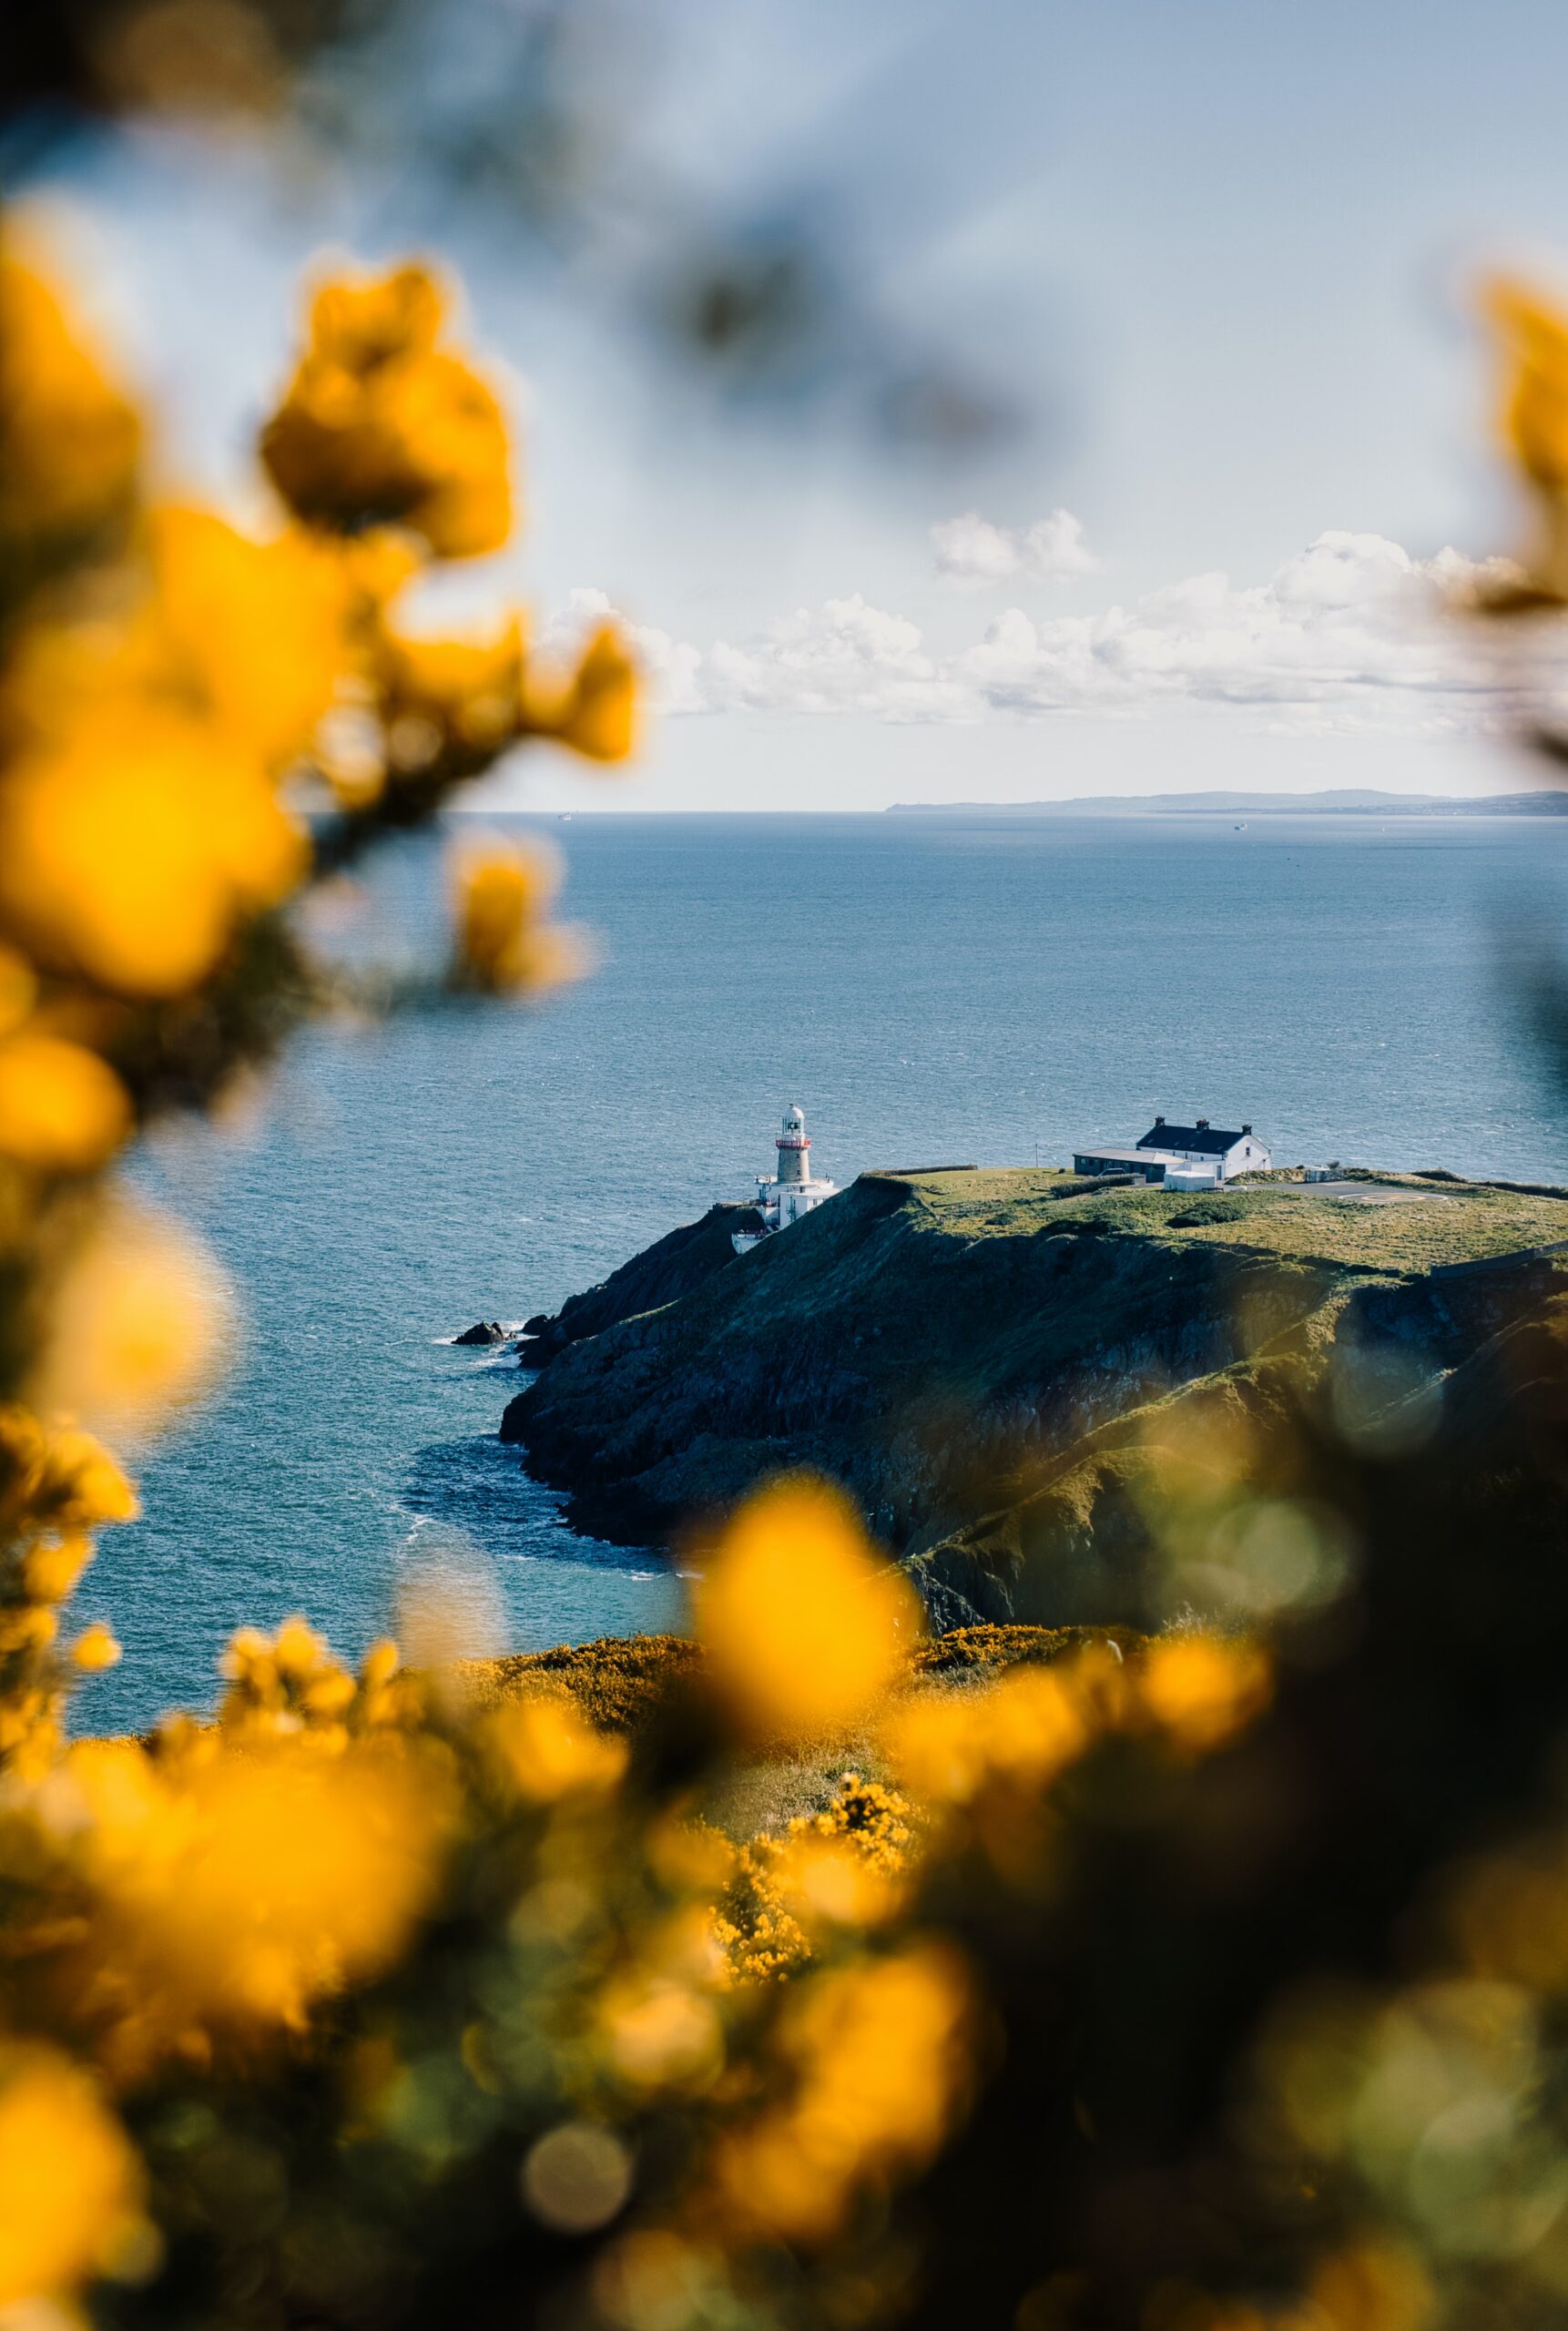 Howth Cliff Walk is one of the best things to do in Dublin